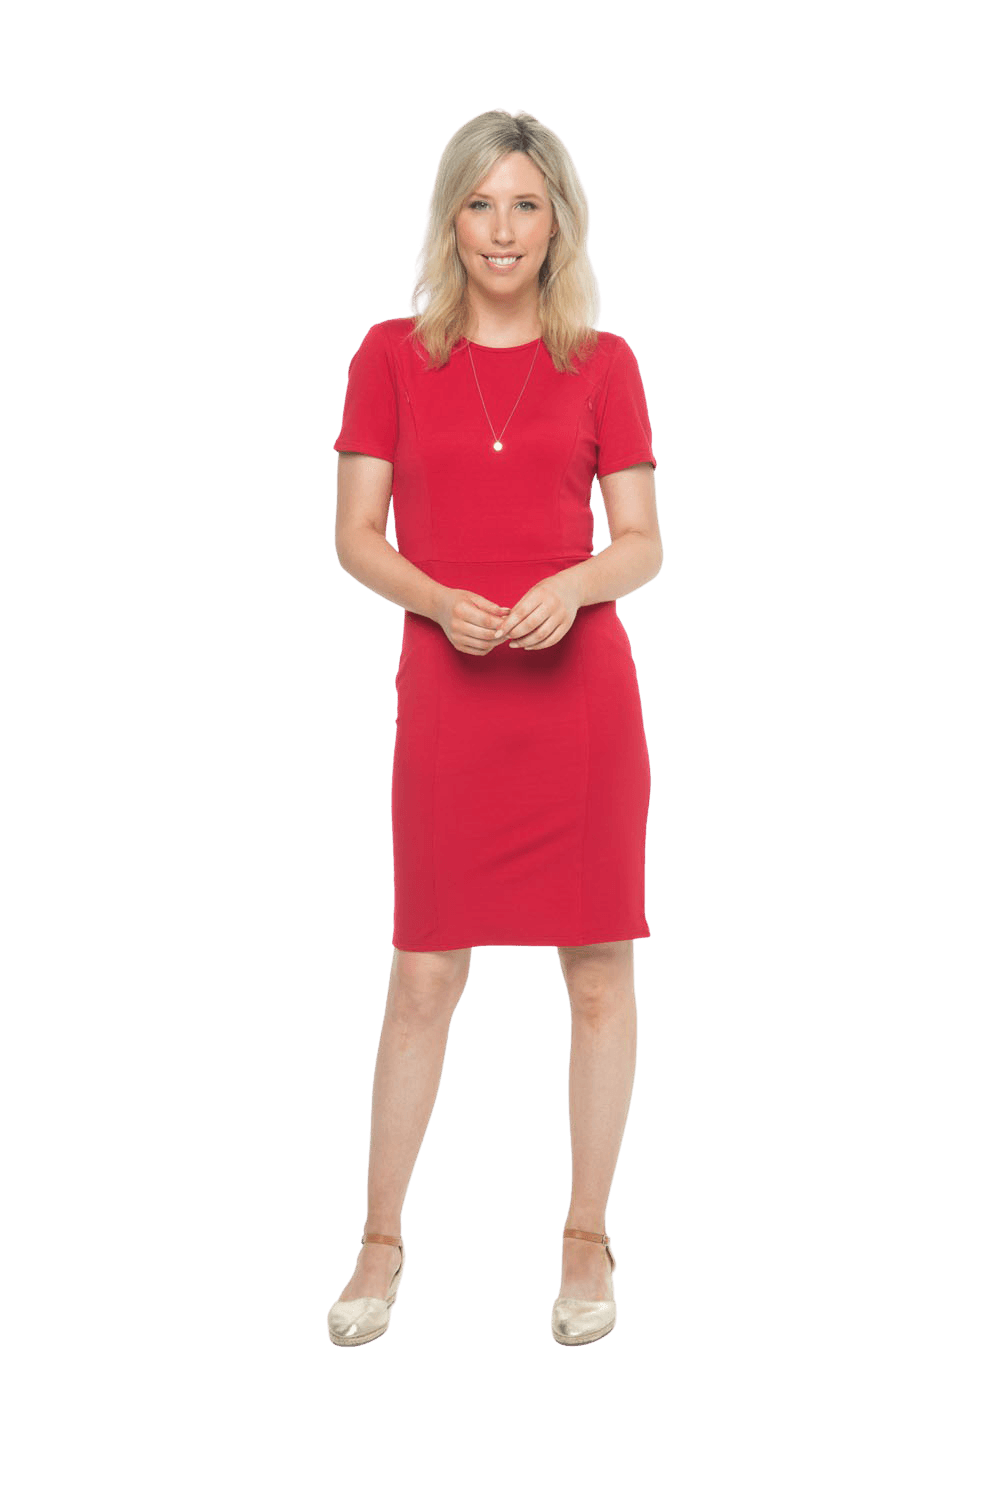 Petite model facing camera wearing red dress, featuring rounded neckline, back zip and an elegant, fitted silhouette. Juliet available in sizes 6-18